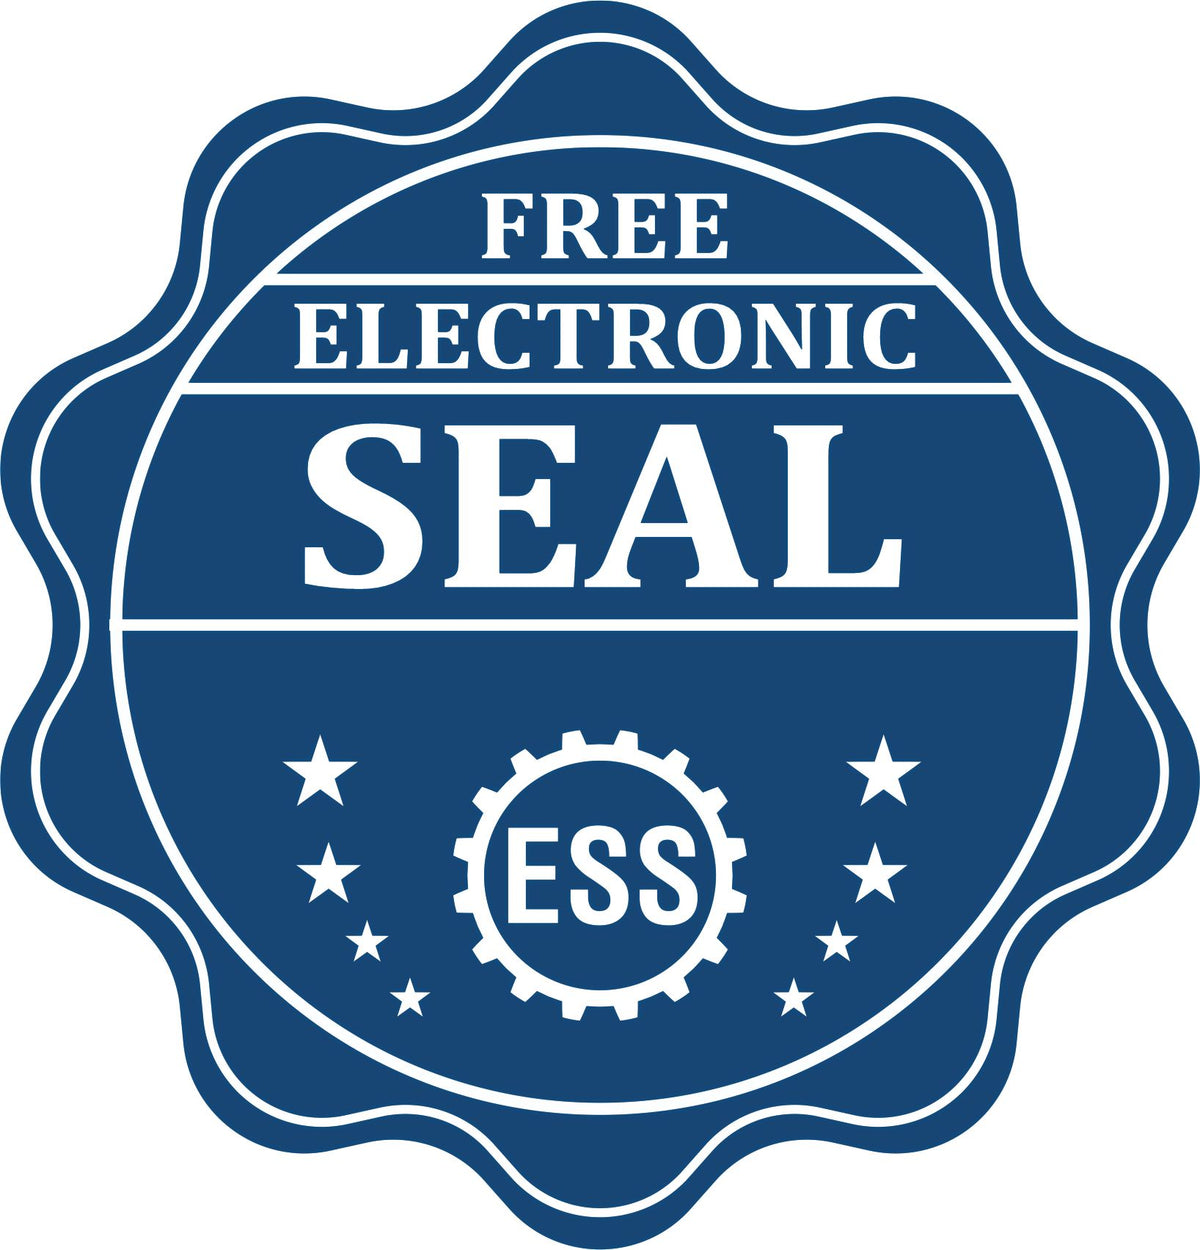 A badge showing a free electronic seal for the District of Columbia Engineer Desk Seal with stars and the ESS gear on the emblem.